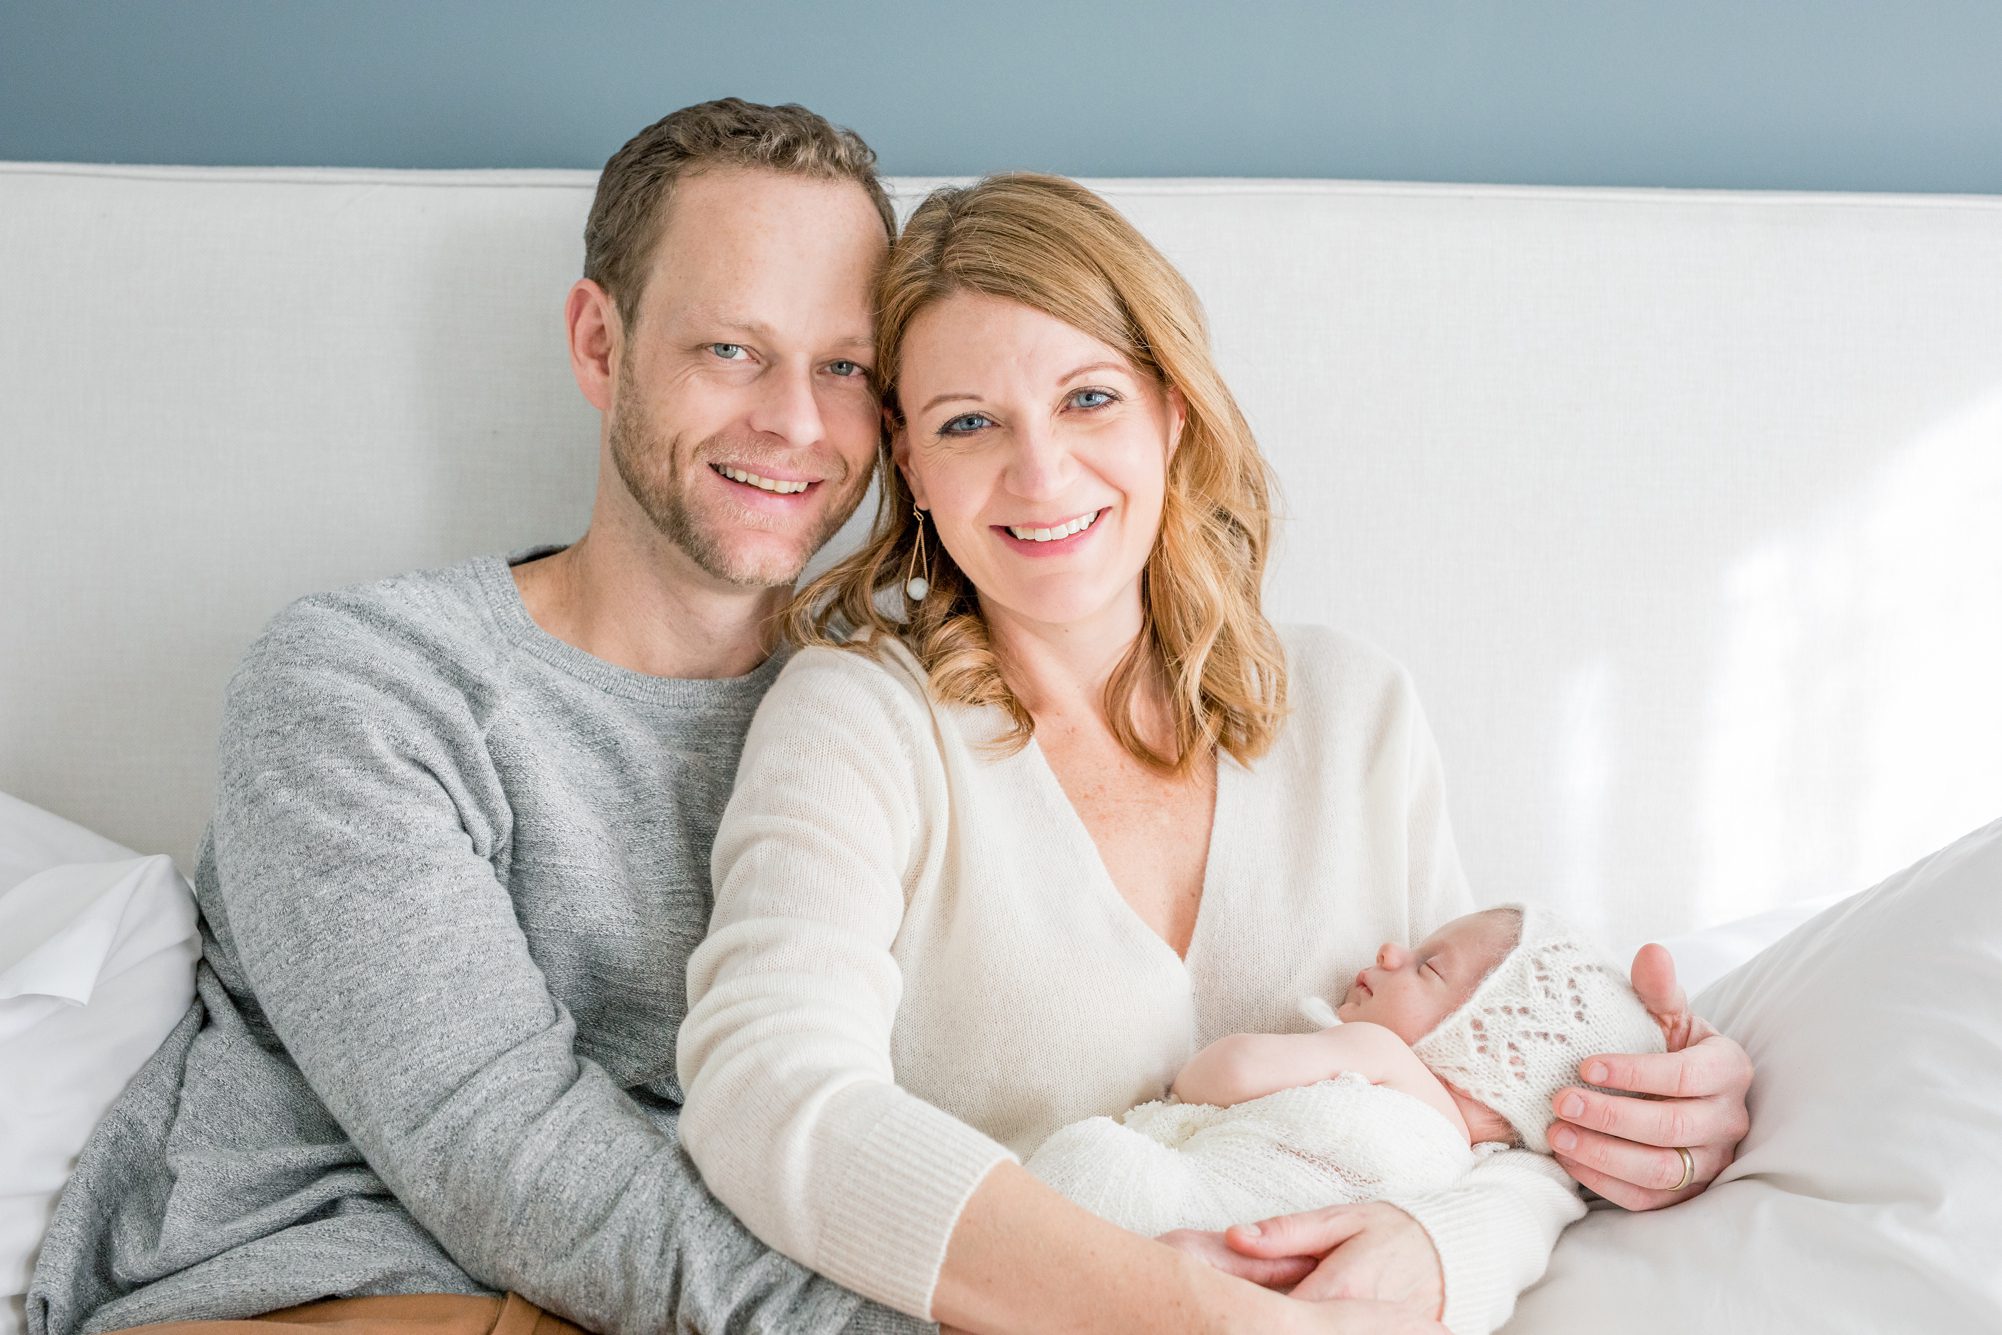 Mom and Dad holding baby on bed during newborn session. Photo by LRG Portraits